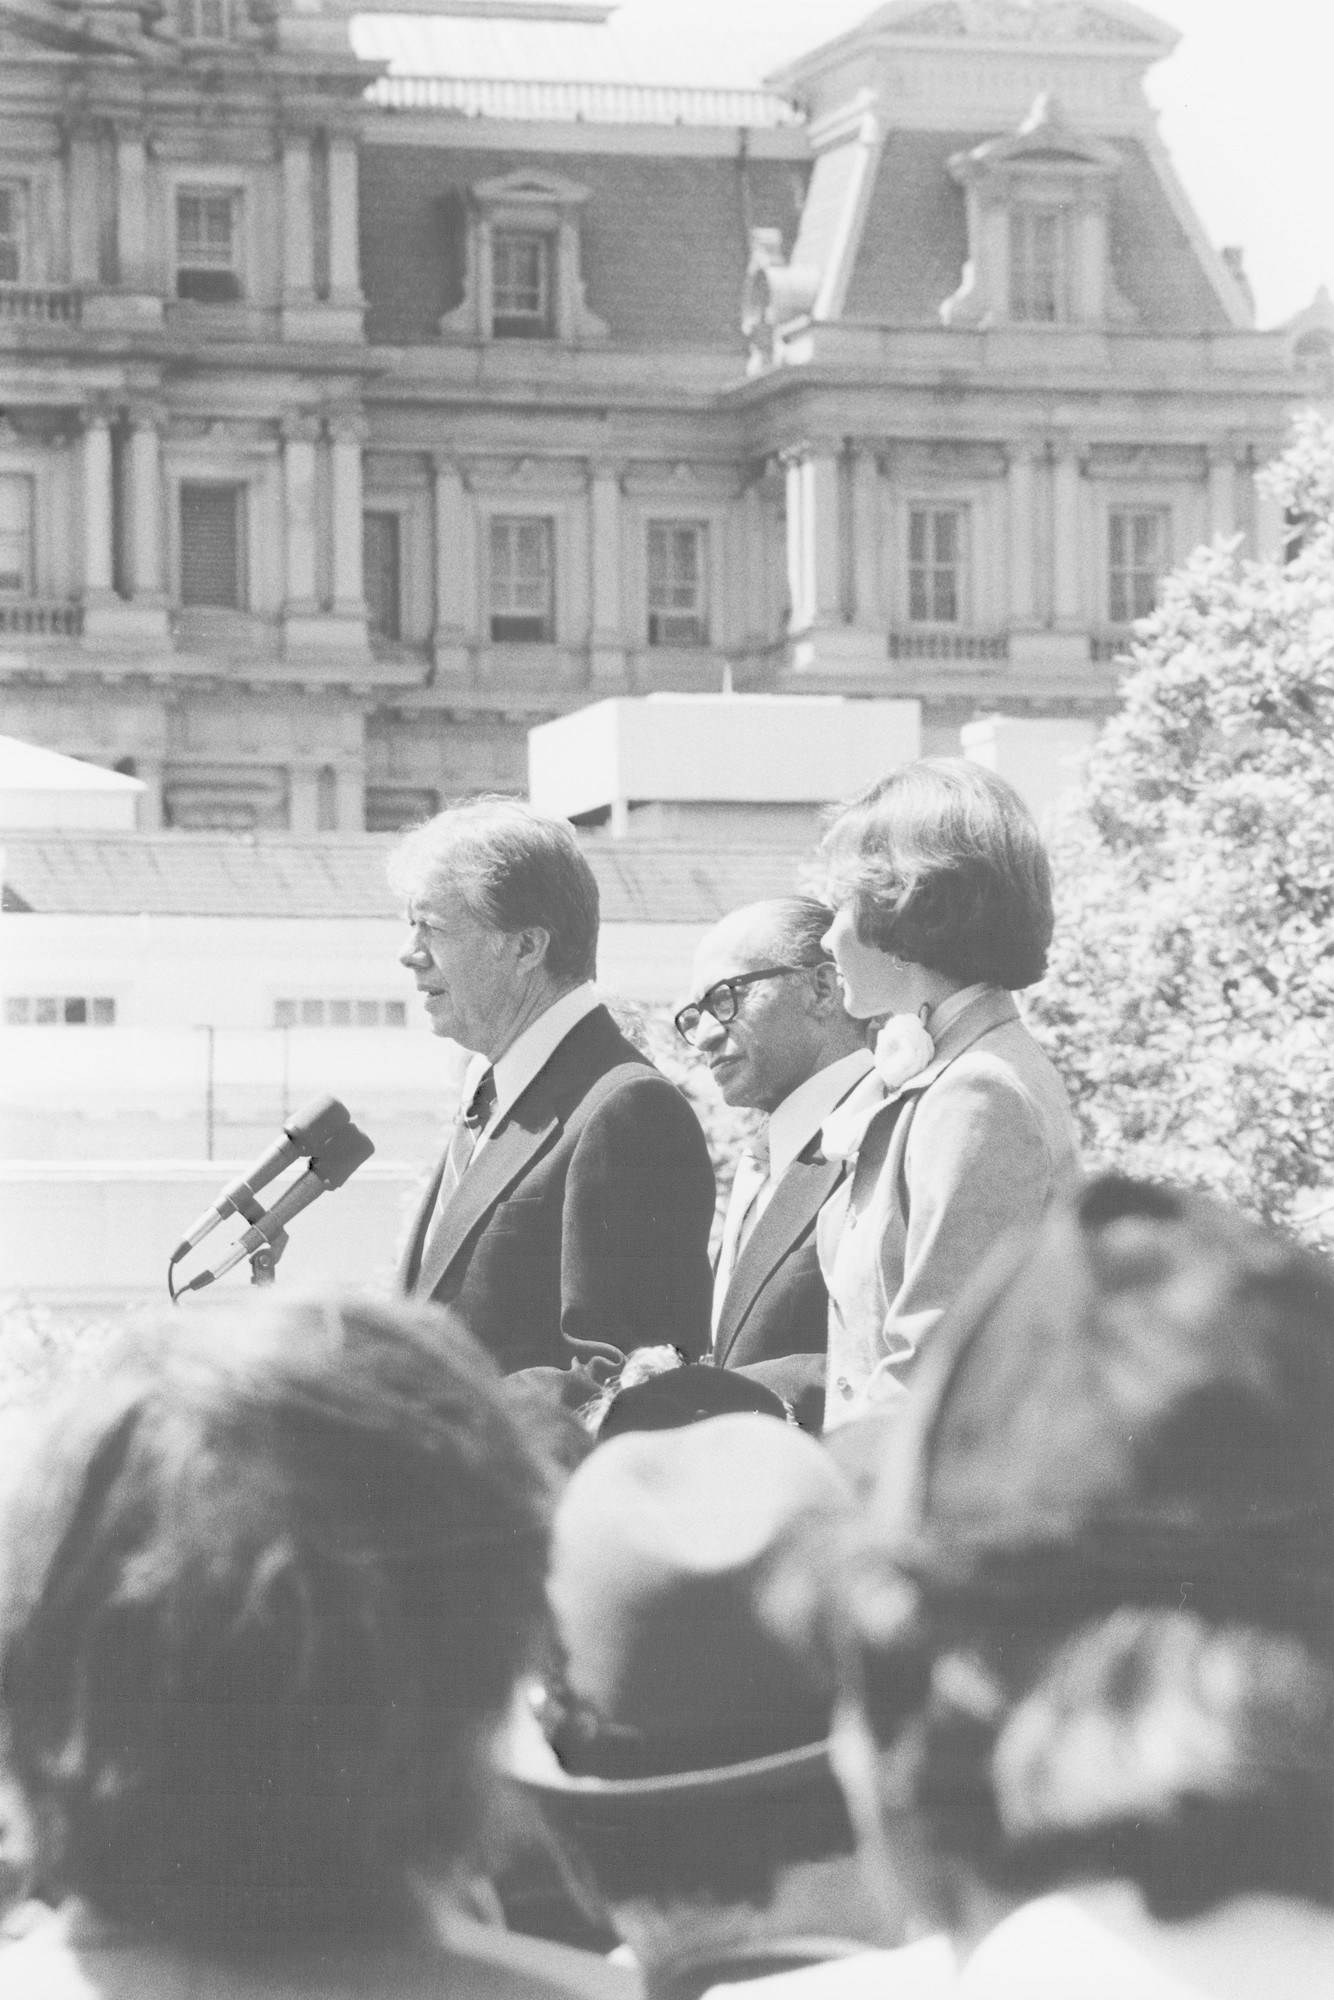 President Jimmy Carter delivers a speech at a White House ceremony marking the establishment of the Holocaust Commission.

Pictured on the podium from left to right are: President Carter, Menachem Begin and Rosalyn Carter.